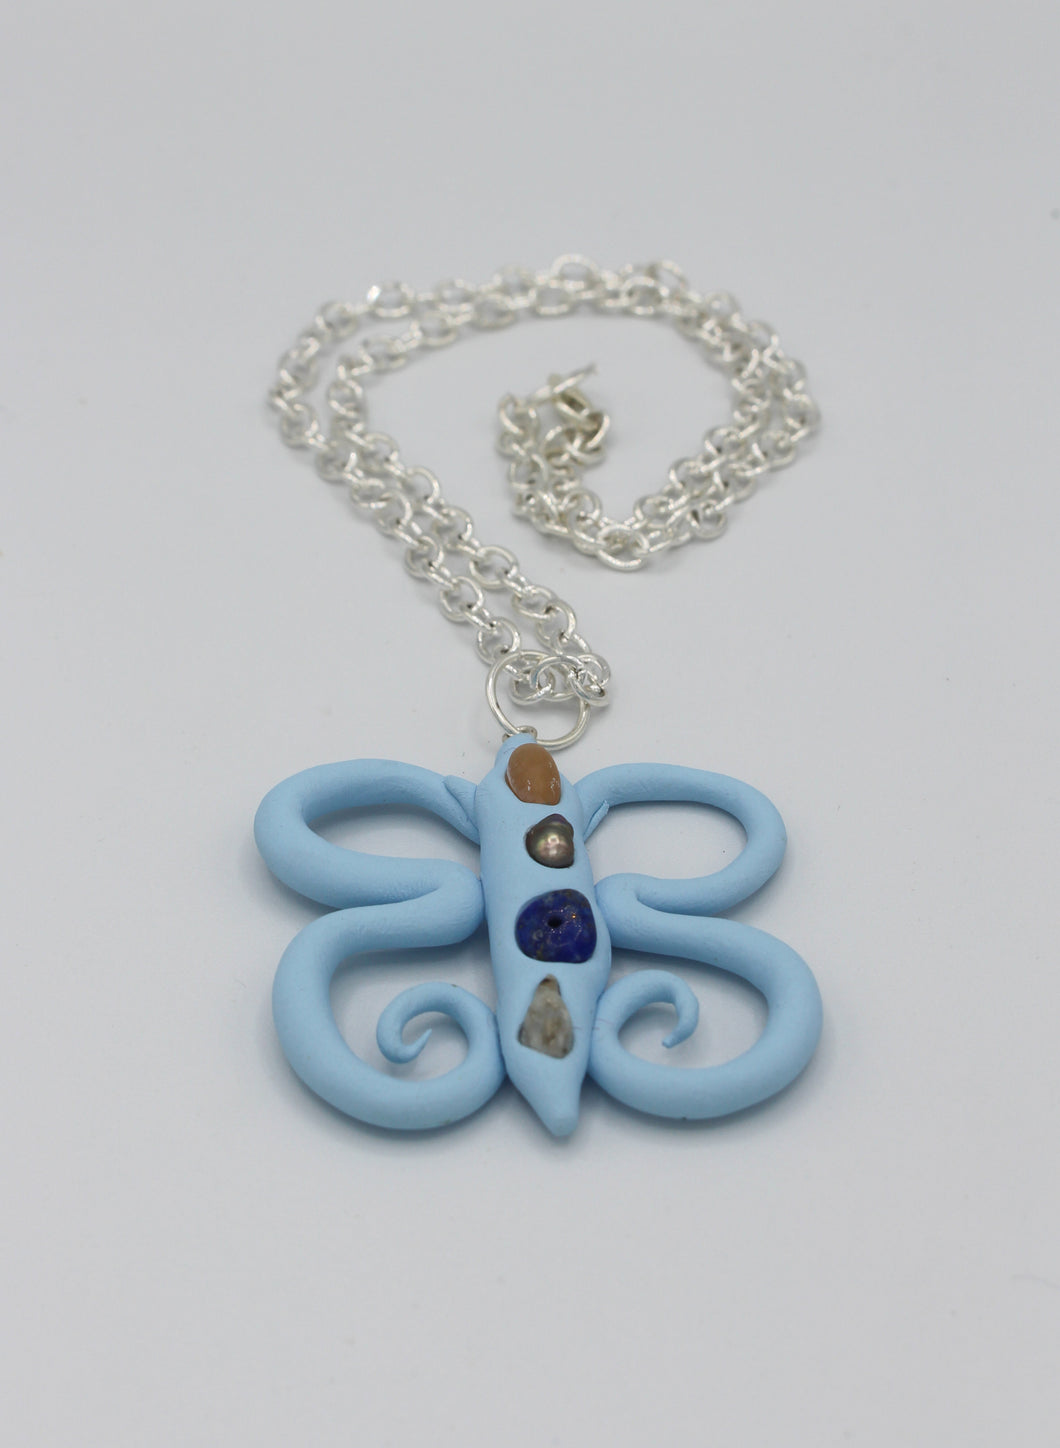 Butterfly charm necklace